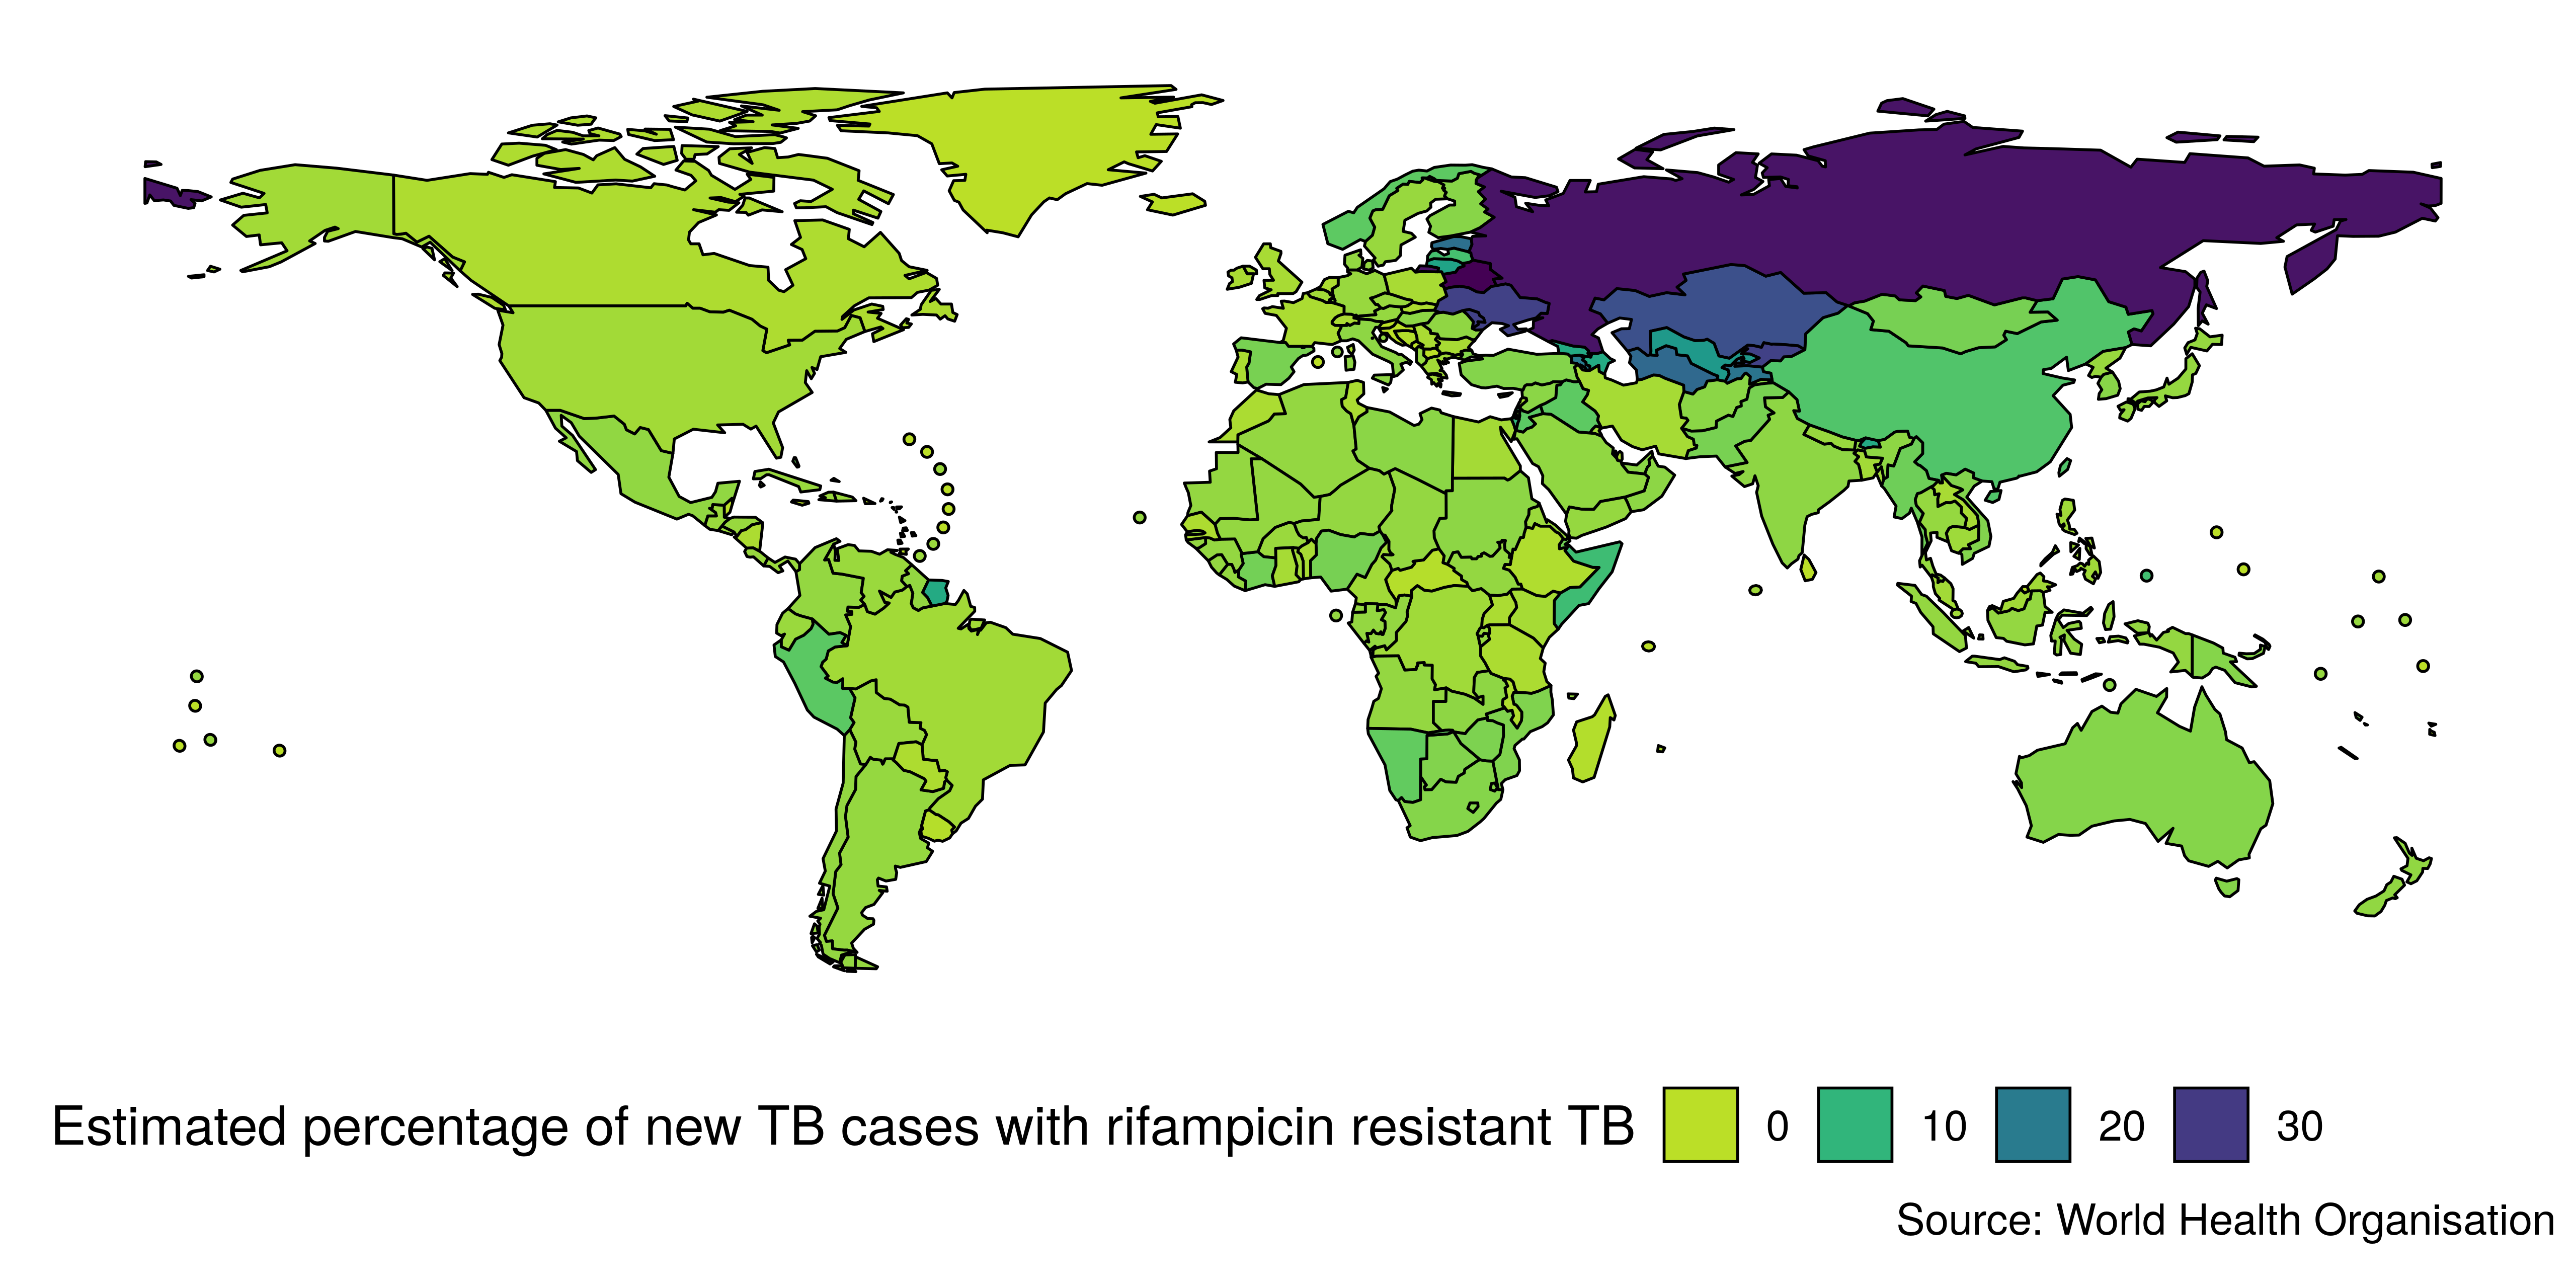 Global map of the estimated percentage of new TB cases with rifampicin resistance (percent) in 2018. Note that a far higher percentage of TB cases have rifampicin resistance in the former Soviet Union that in the rest of the world. The percentages of rifampicin resistances in incident TB in the legend refer to the lower bound for each colour.